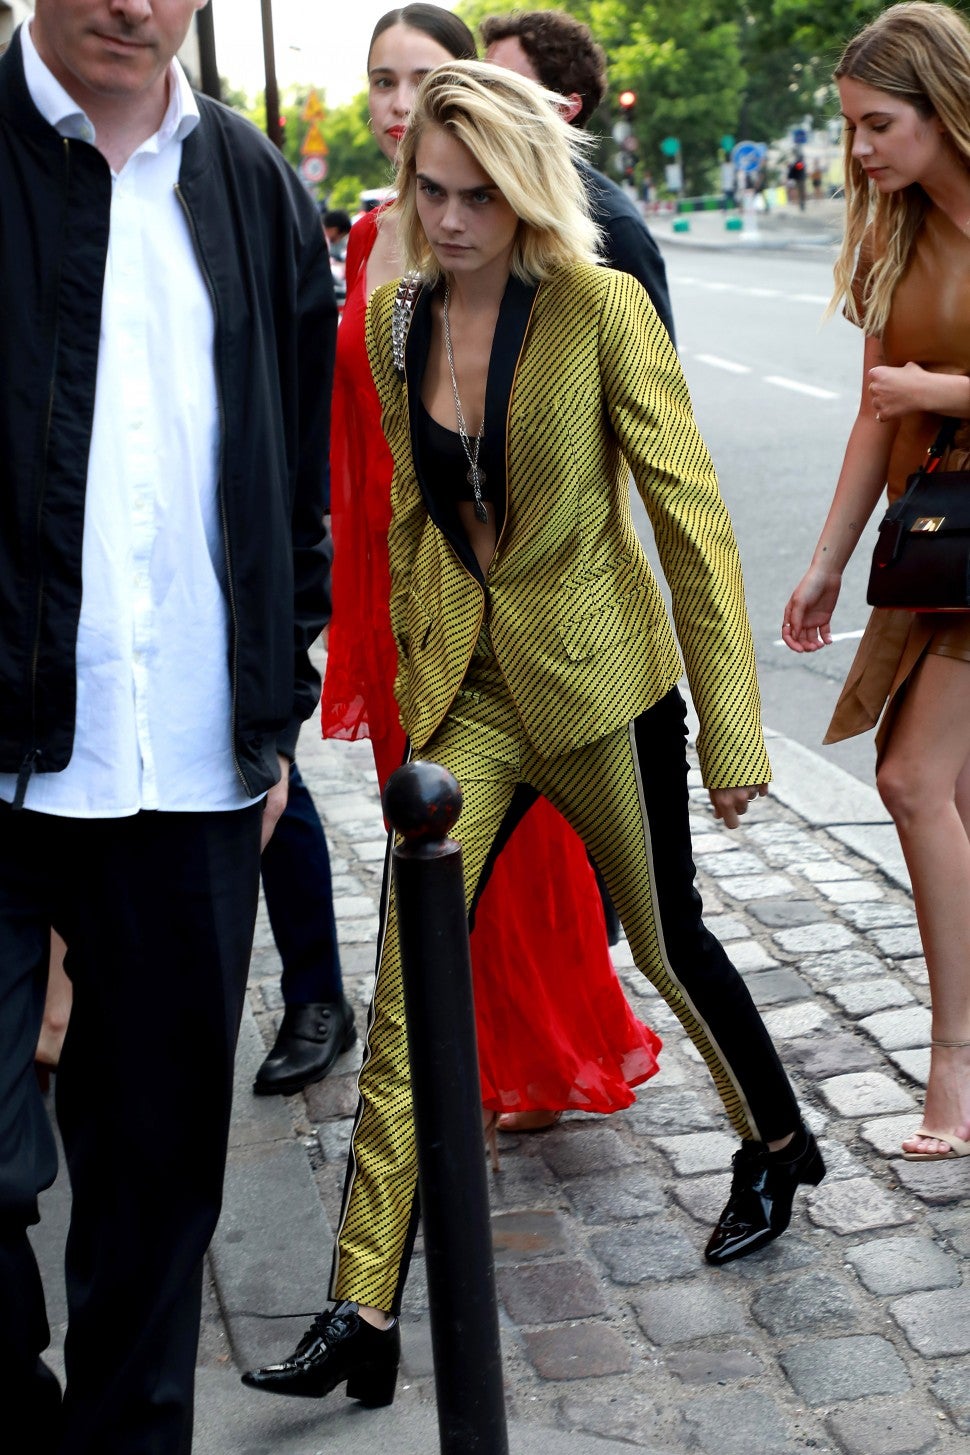 Cara Delevingne arrives at Laperouse restaurant where a pre-wedding dinner for Zoe Kravitz and Karl Glusma is to be held on June 28, 2019 in Paris, France.